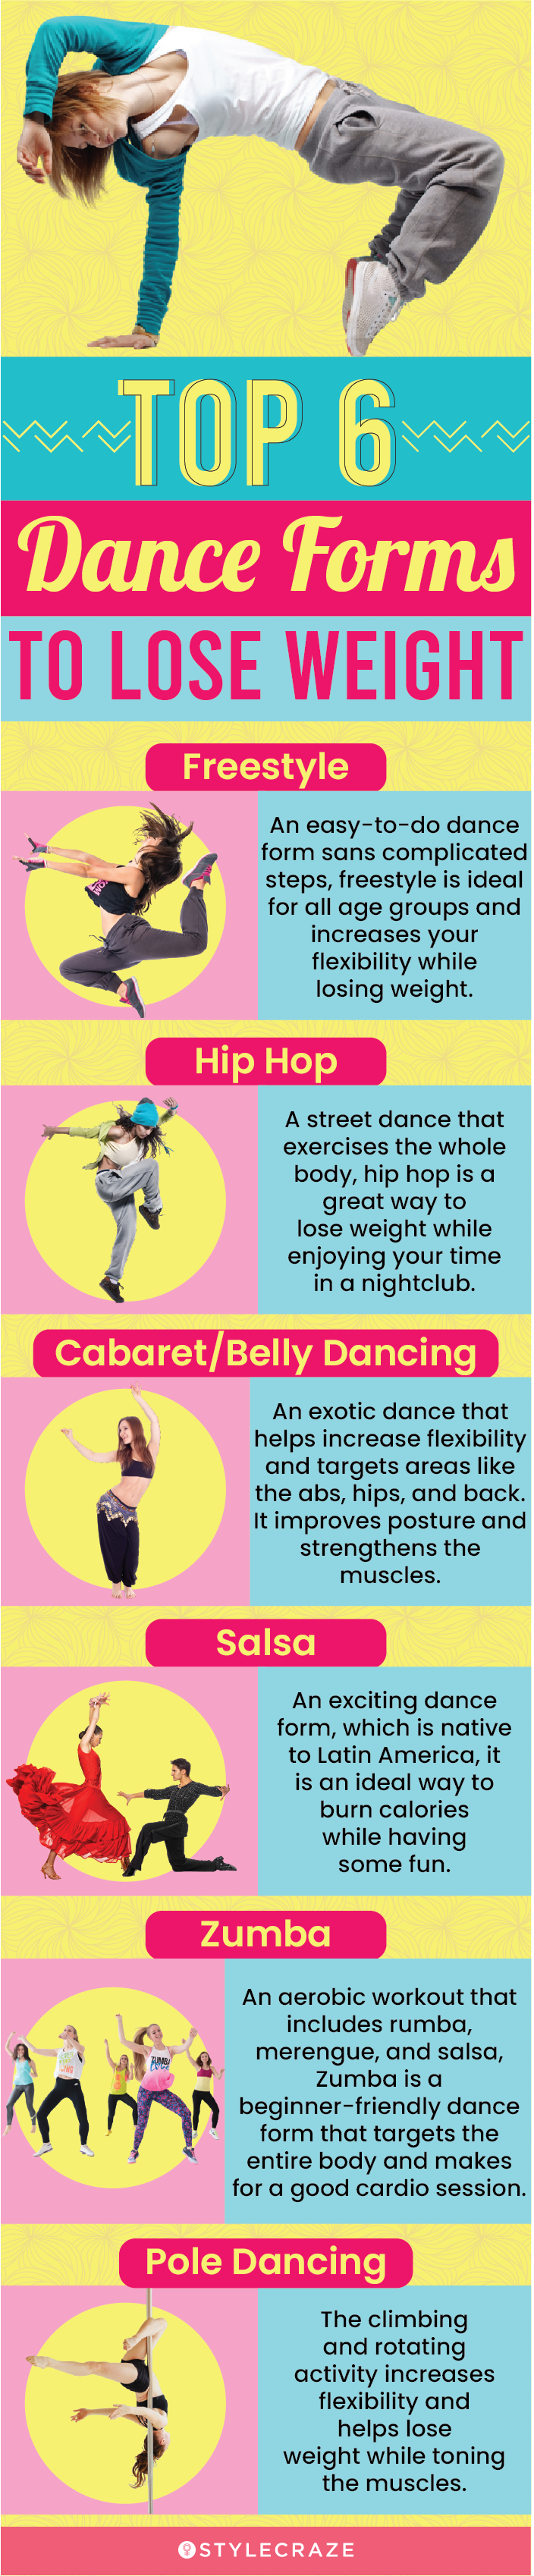 top 6 dance forms to lose weight (infographic)